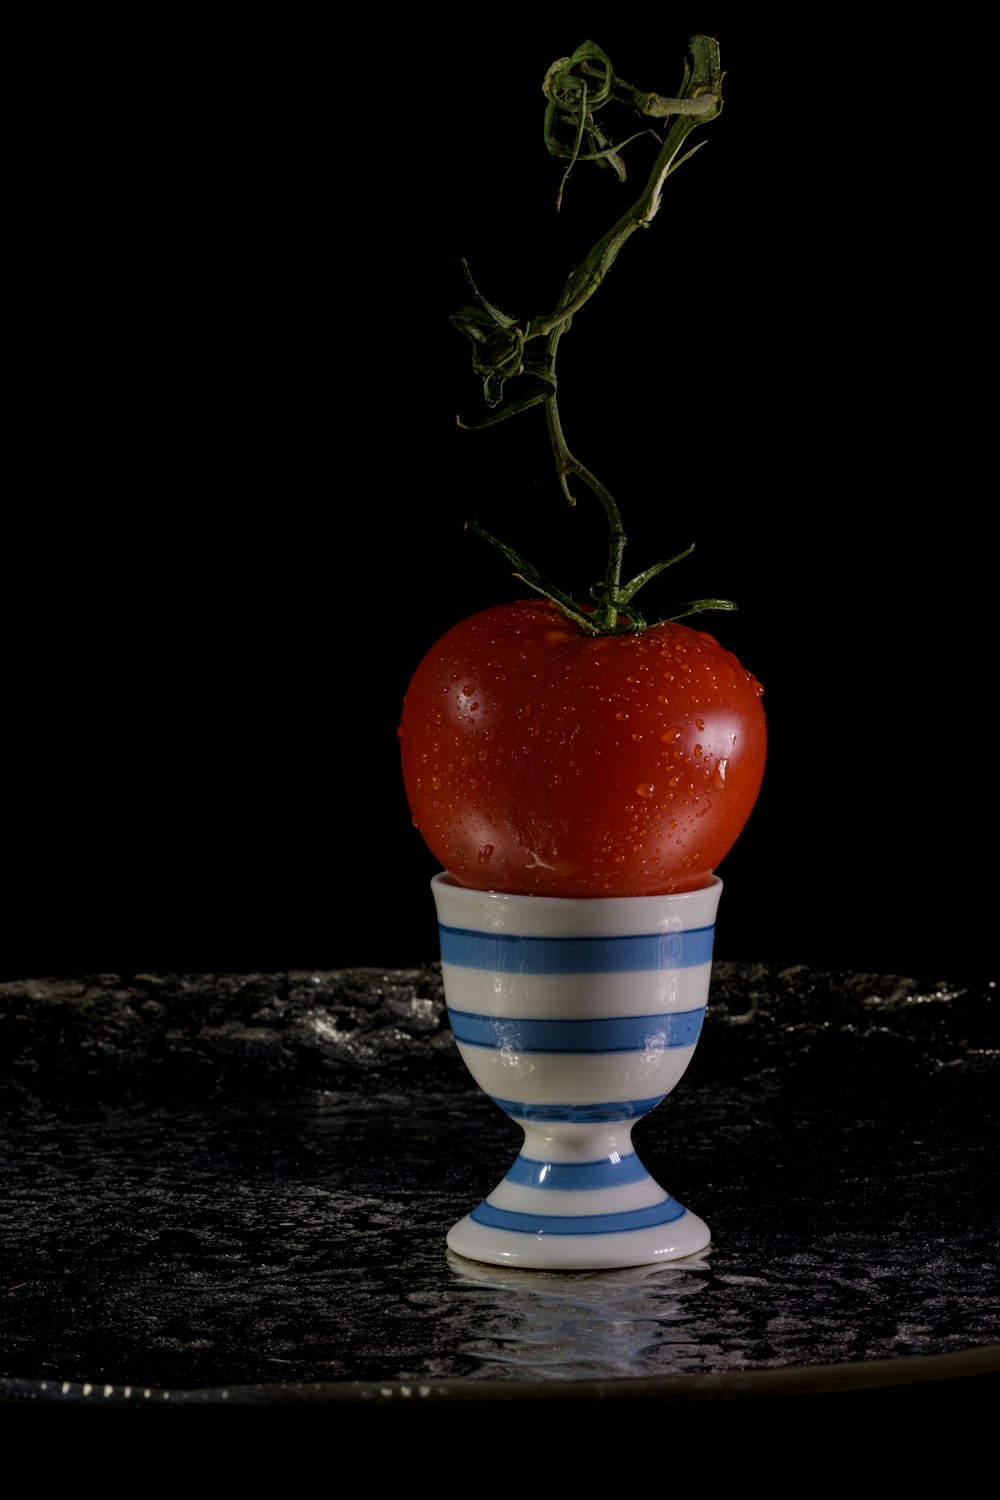 a red apple on a blue and white striped cup